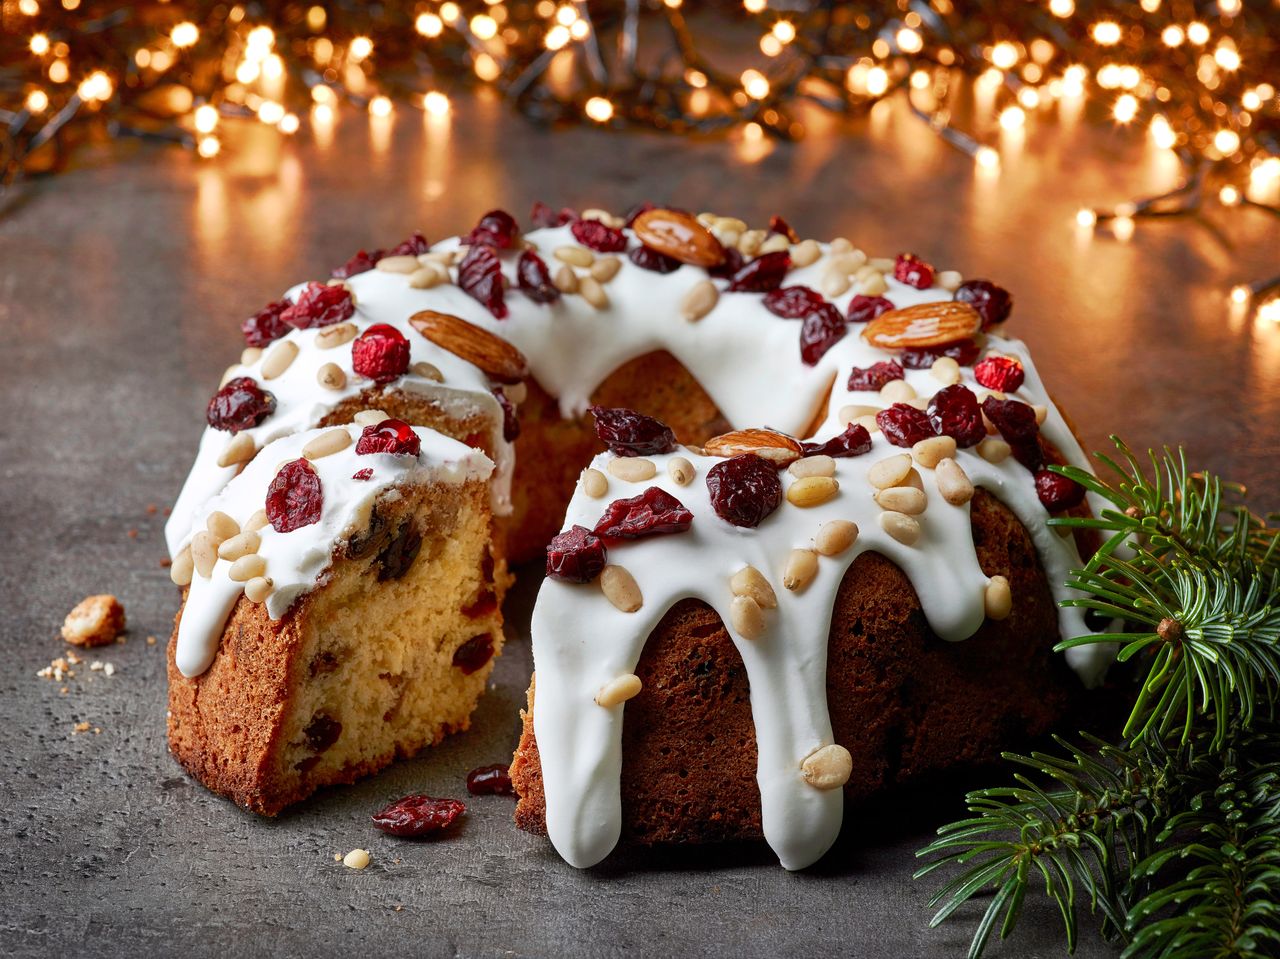 Recipe for aromatic holiday cake